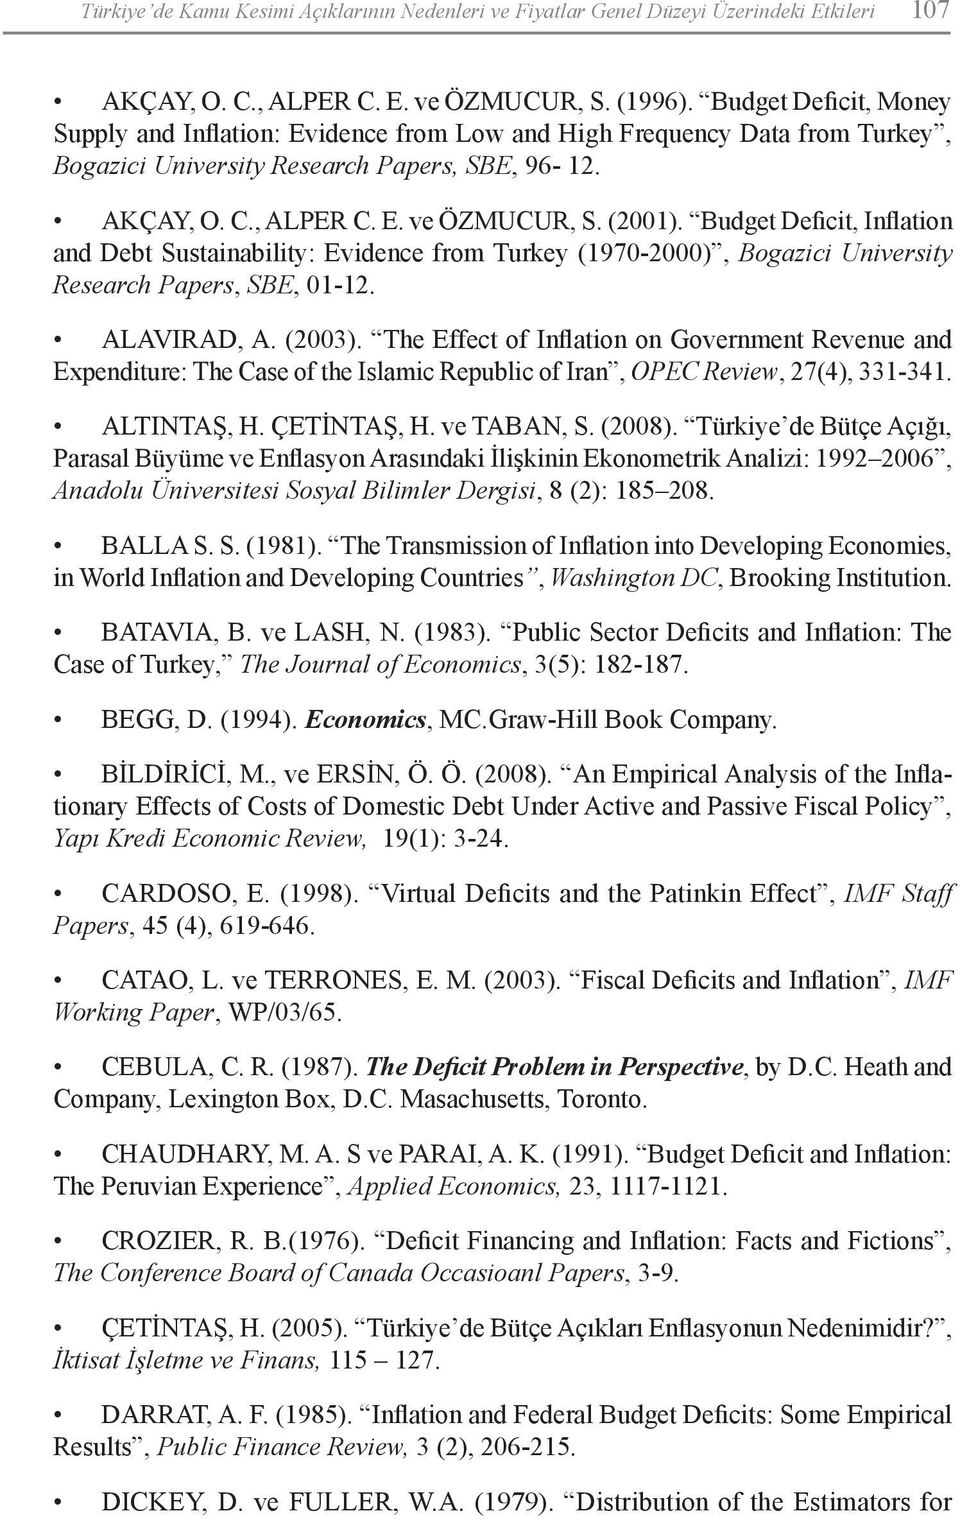 Budget Deficit, Inflation and Debt Sustainability: Evidence from Turkey (1970-2000), Bogazici University Research Papers, SBE, 01-12. ALAVIRAD, A. (2003).